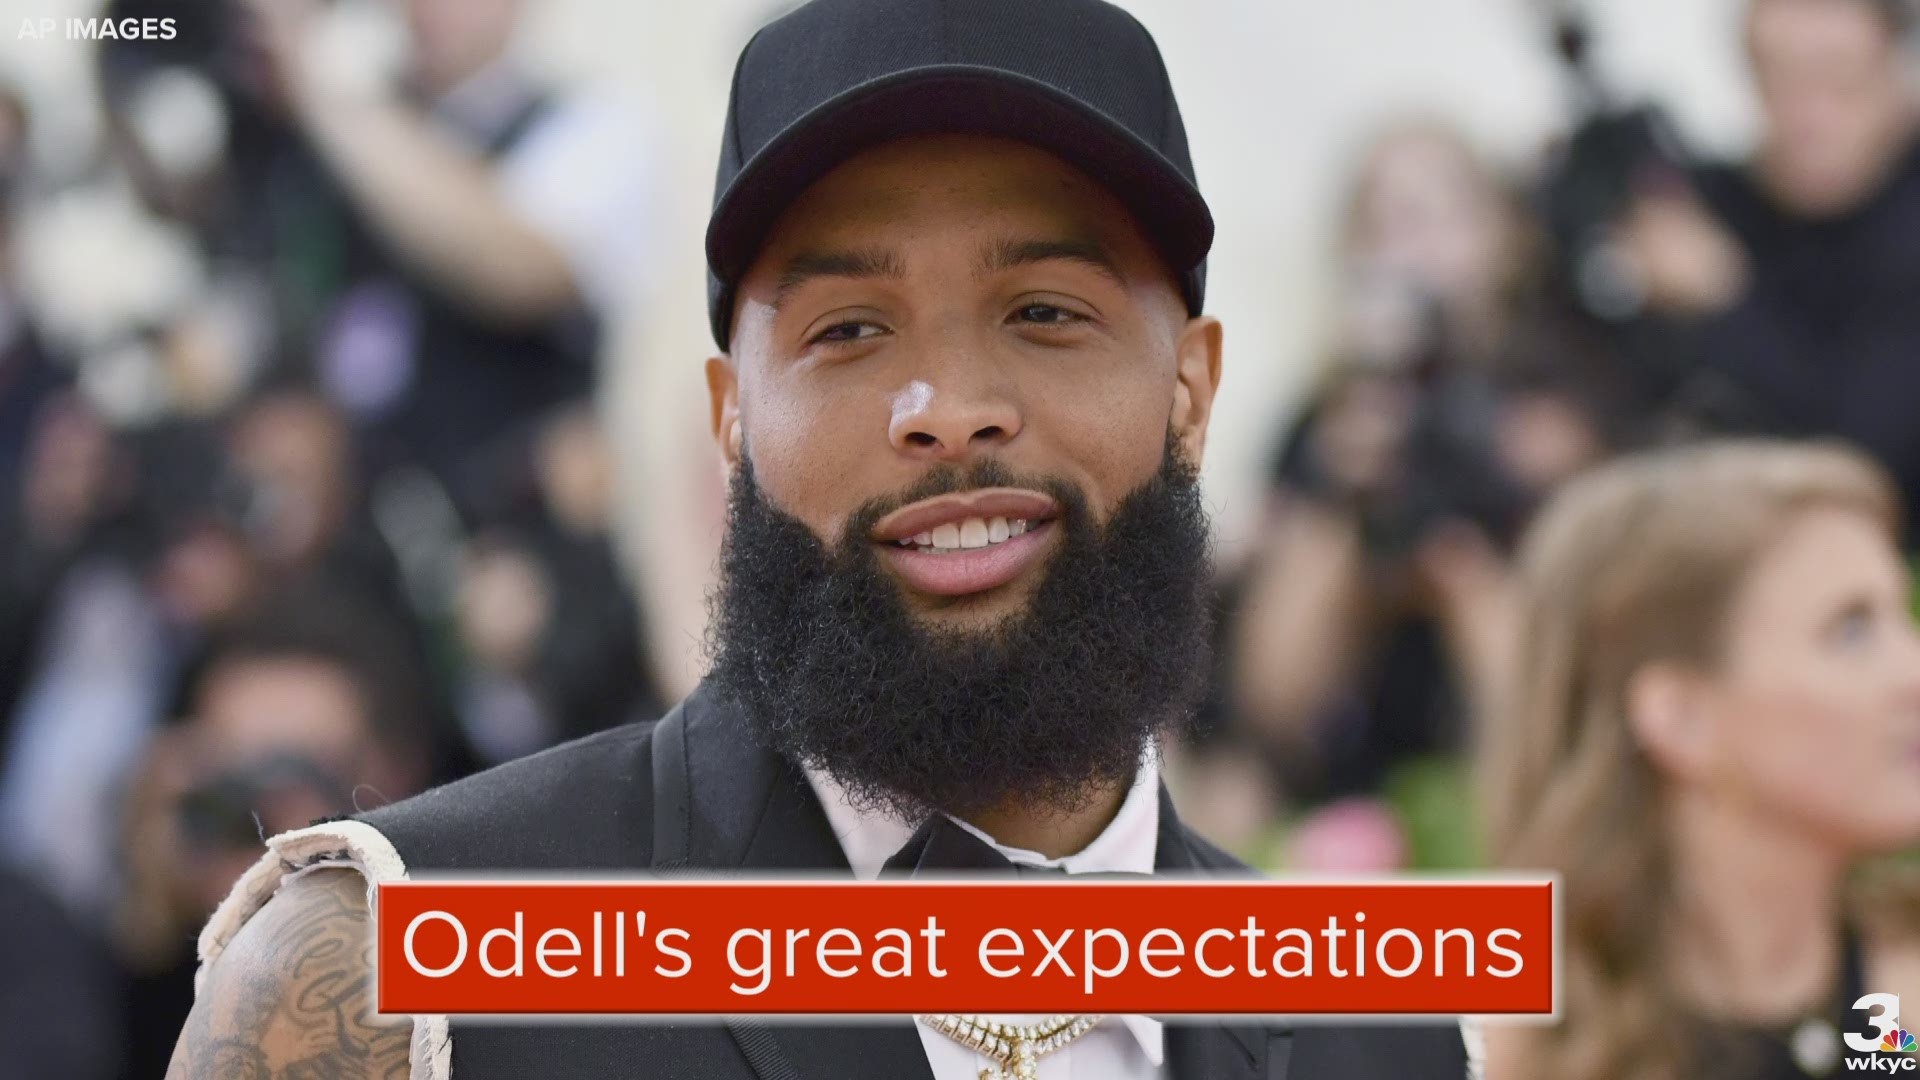 Speaking to GQ, Cleveland Browns wide receiver Odell Beckham Jr. discussed his lofty expectations for his new team.